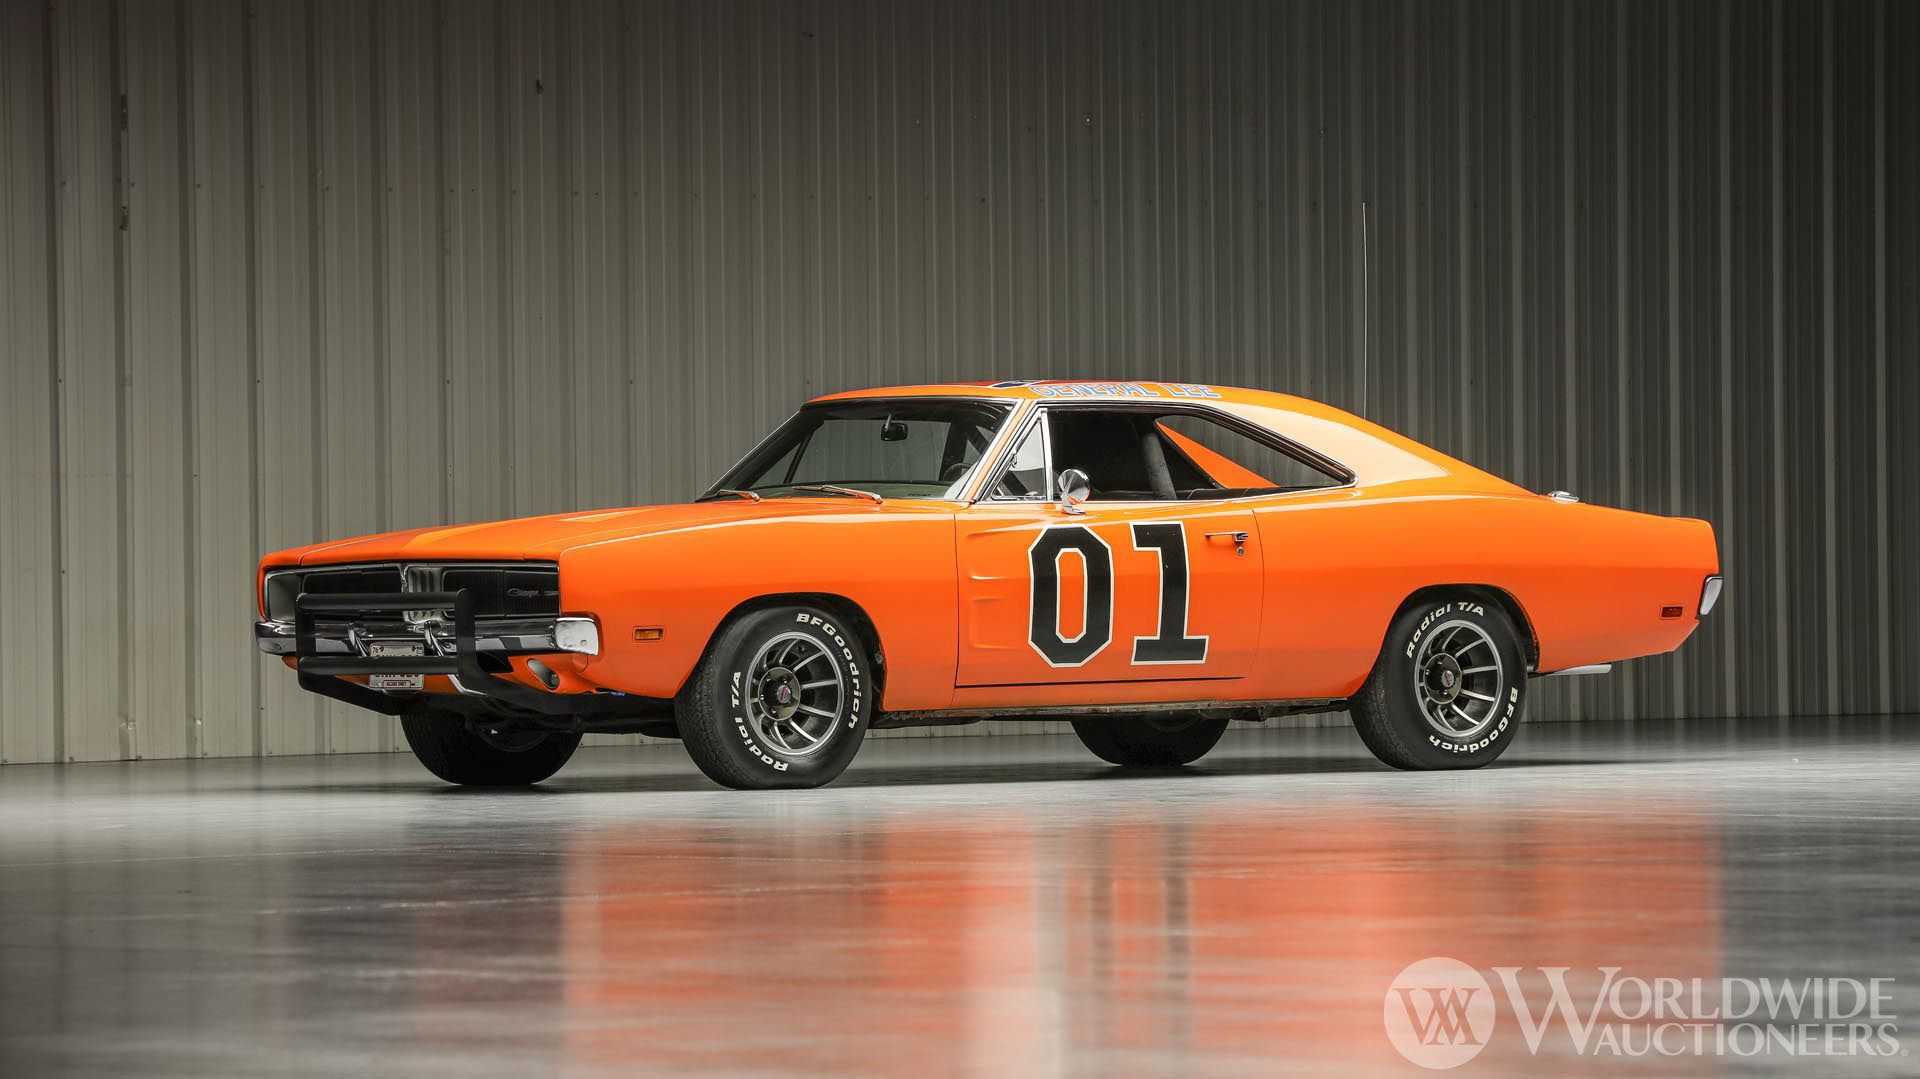 Jump On This Real Deal General Lee 1969 Dodge Charger | American Muscle CarZ